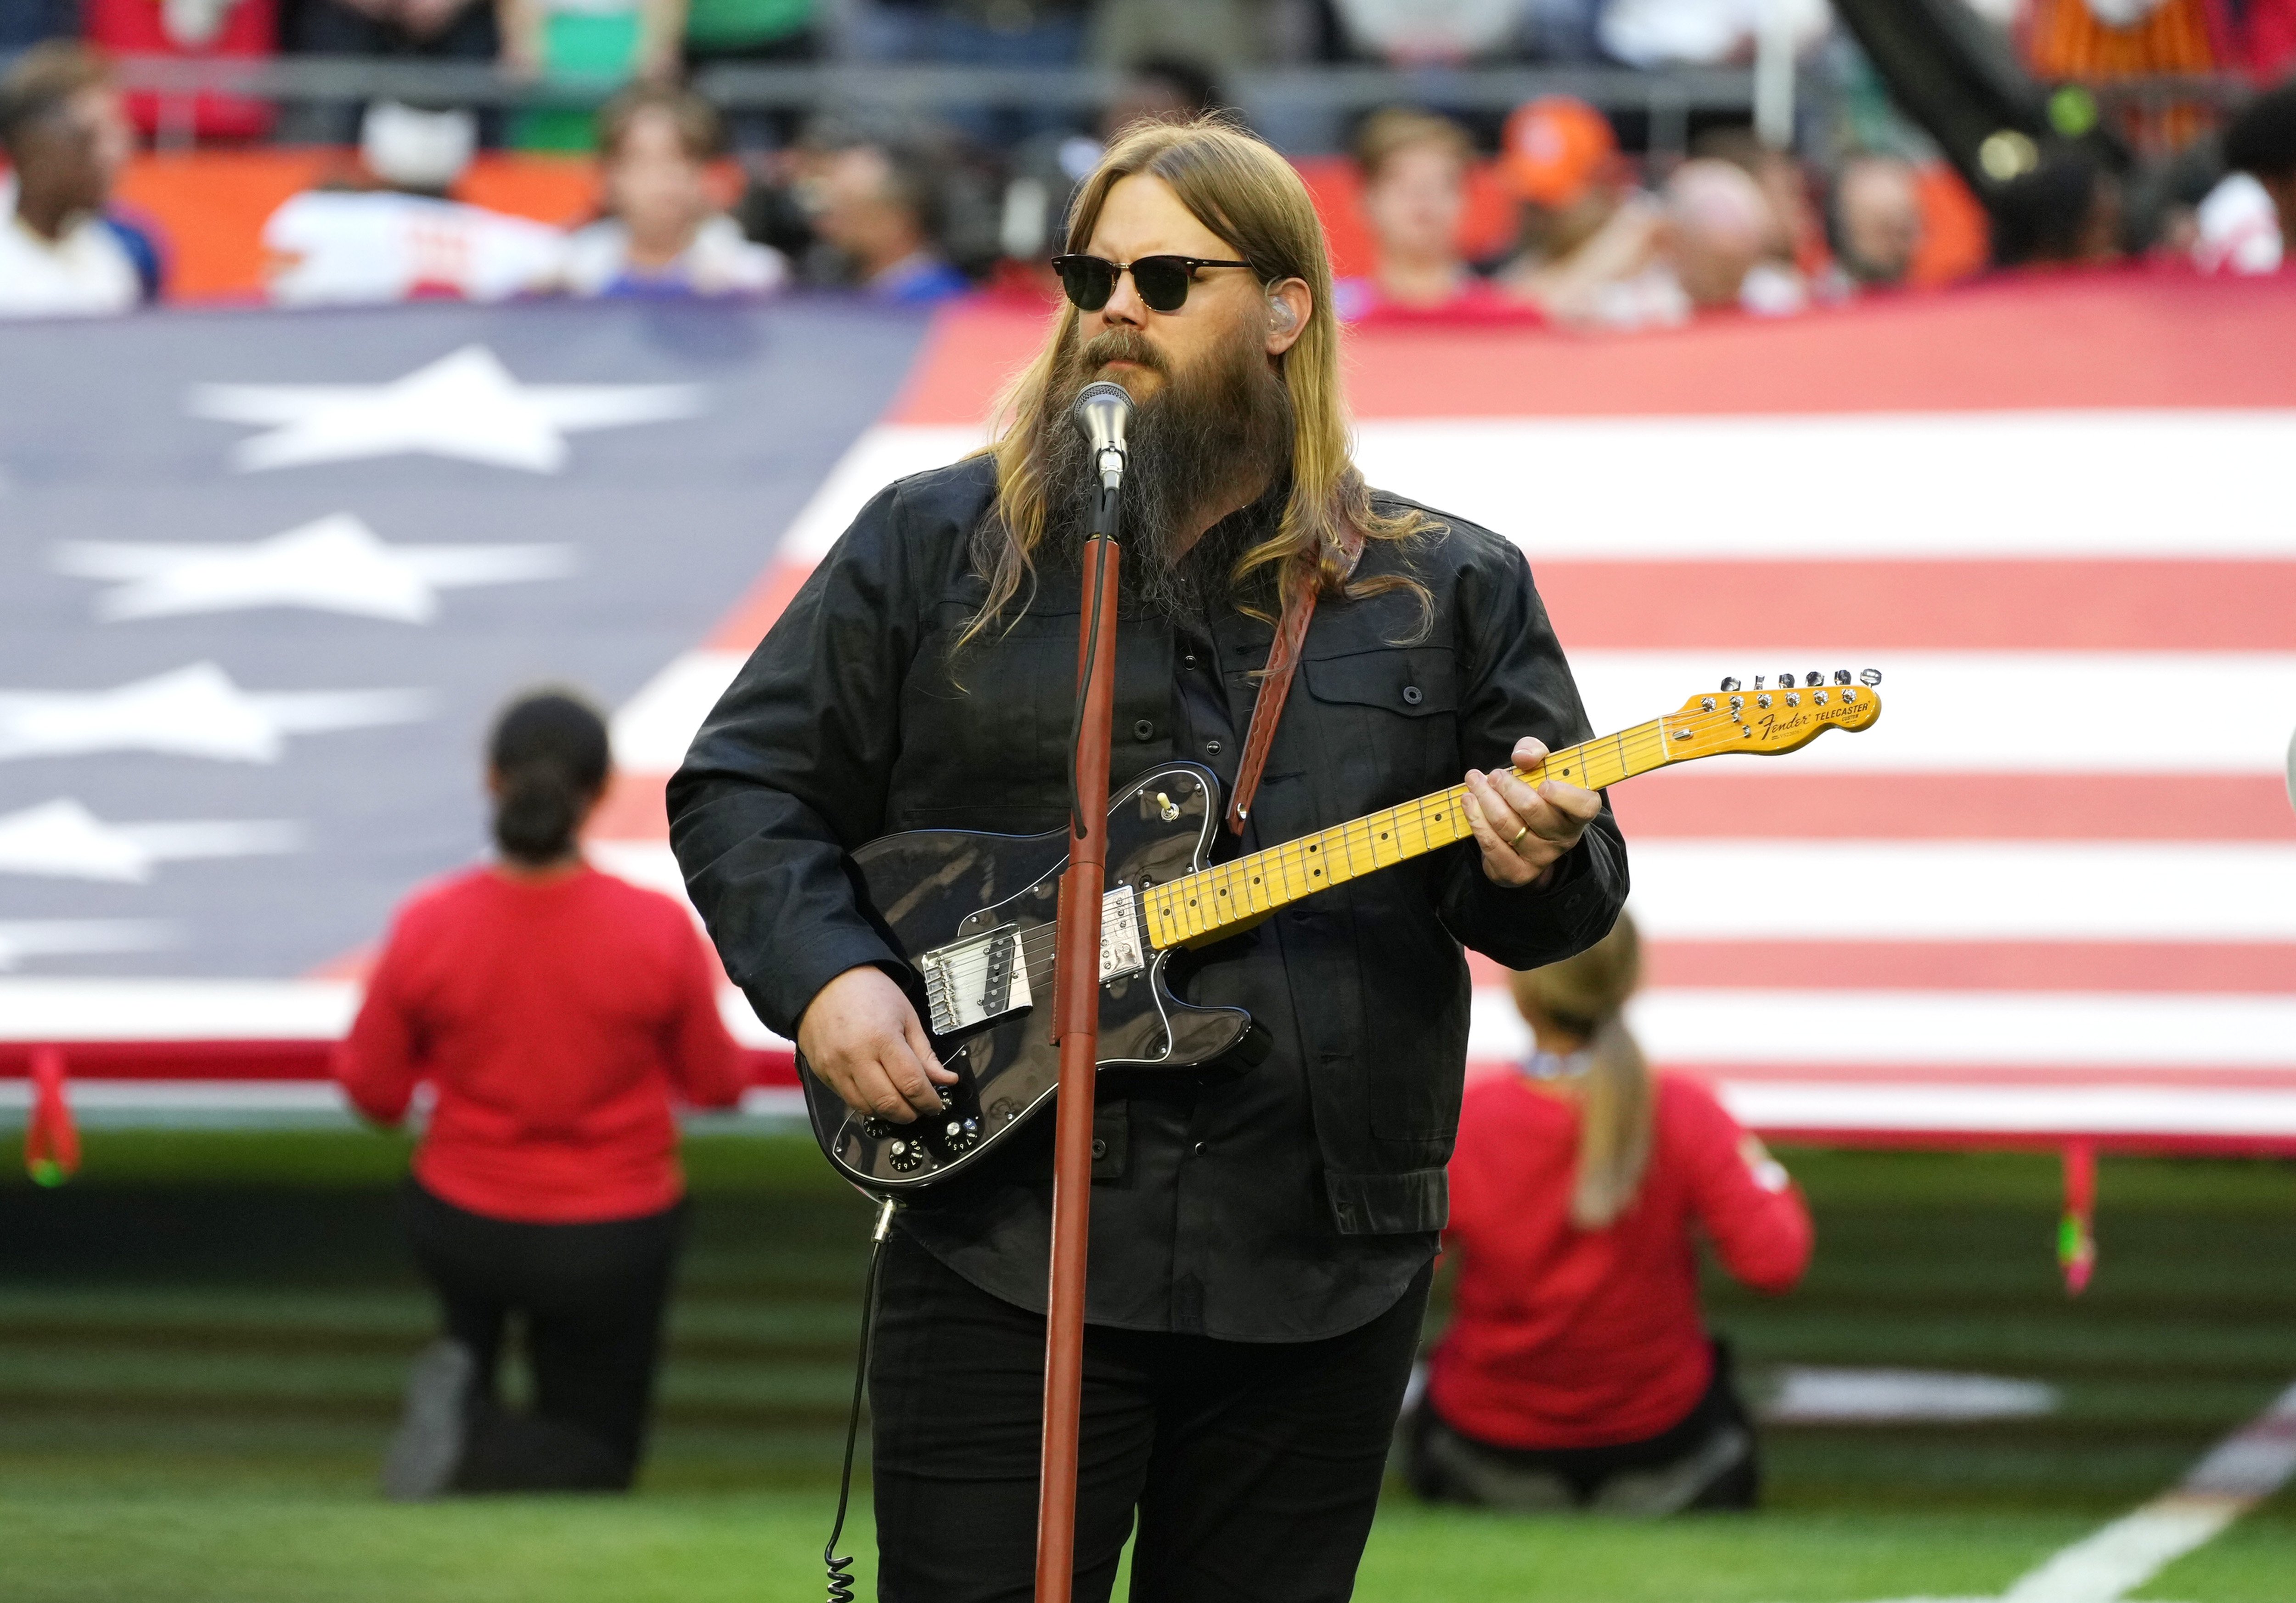 Chris Stapleton is pictured as he performs the national anthem during Super Bowl LVII at State Farm Stadium on February 12, 2023, in Glendale, Arizona | Source: Getty Images